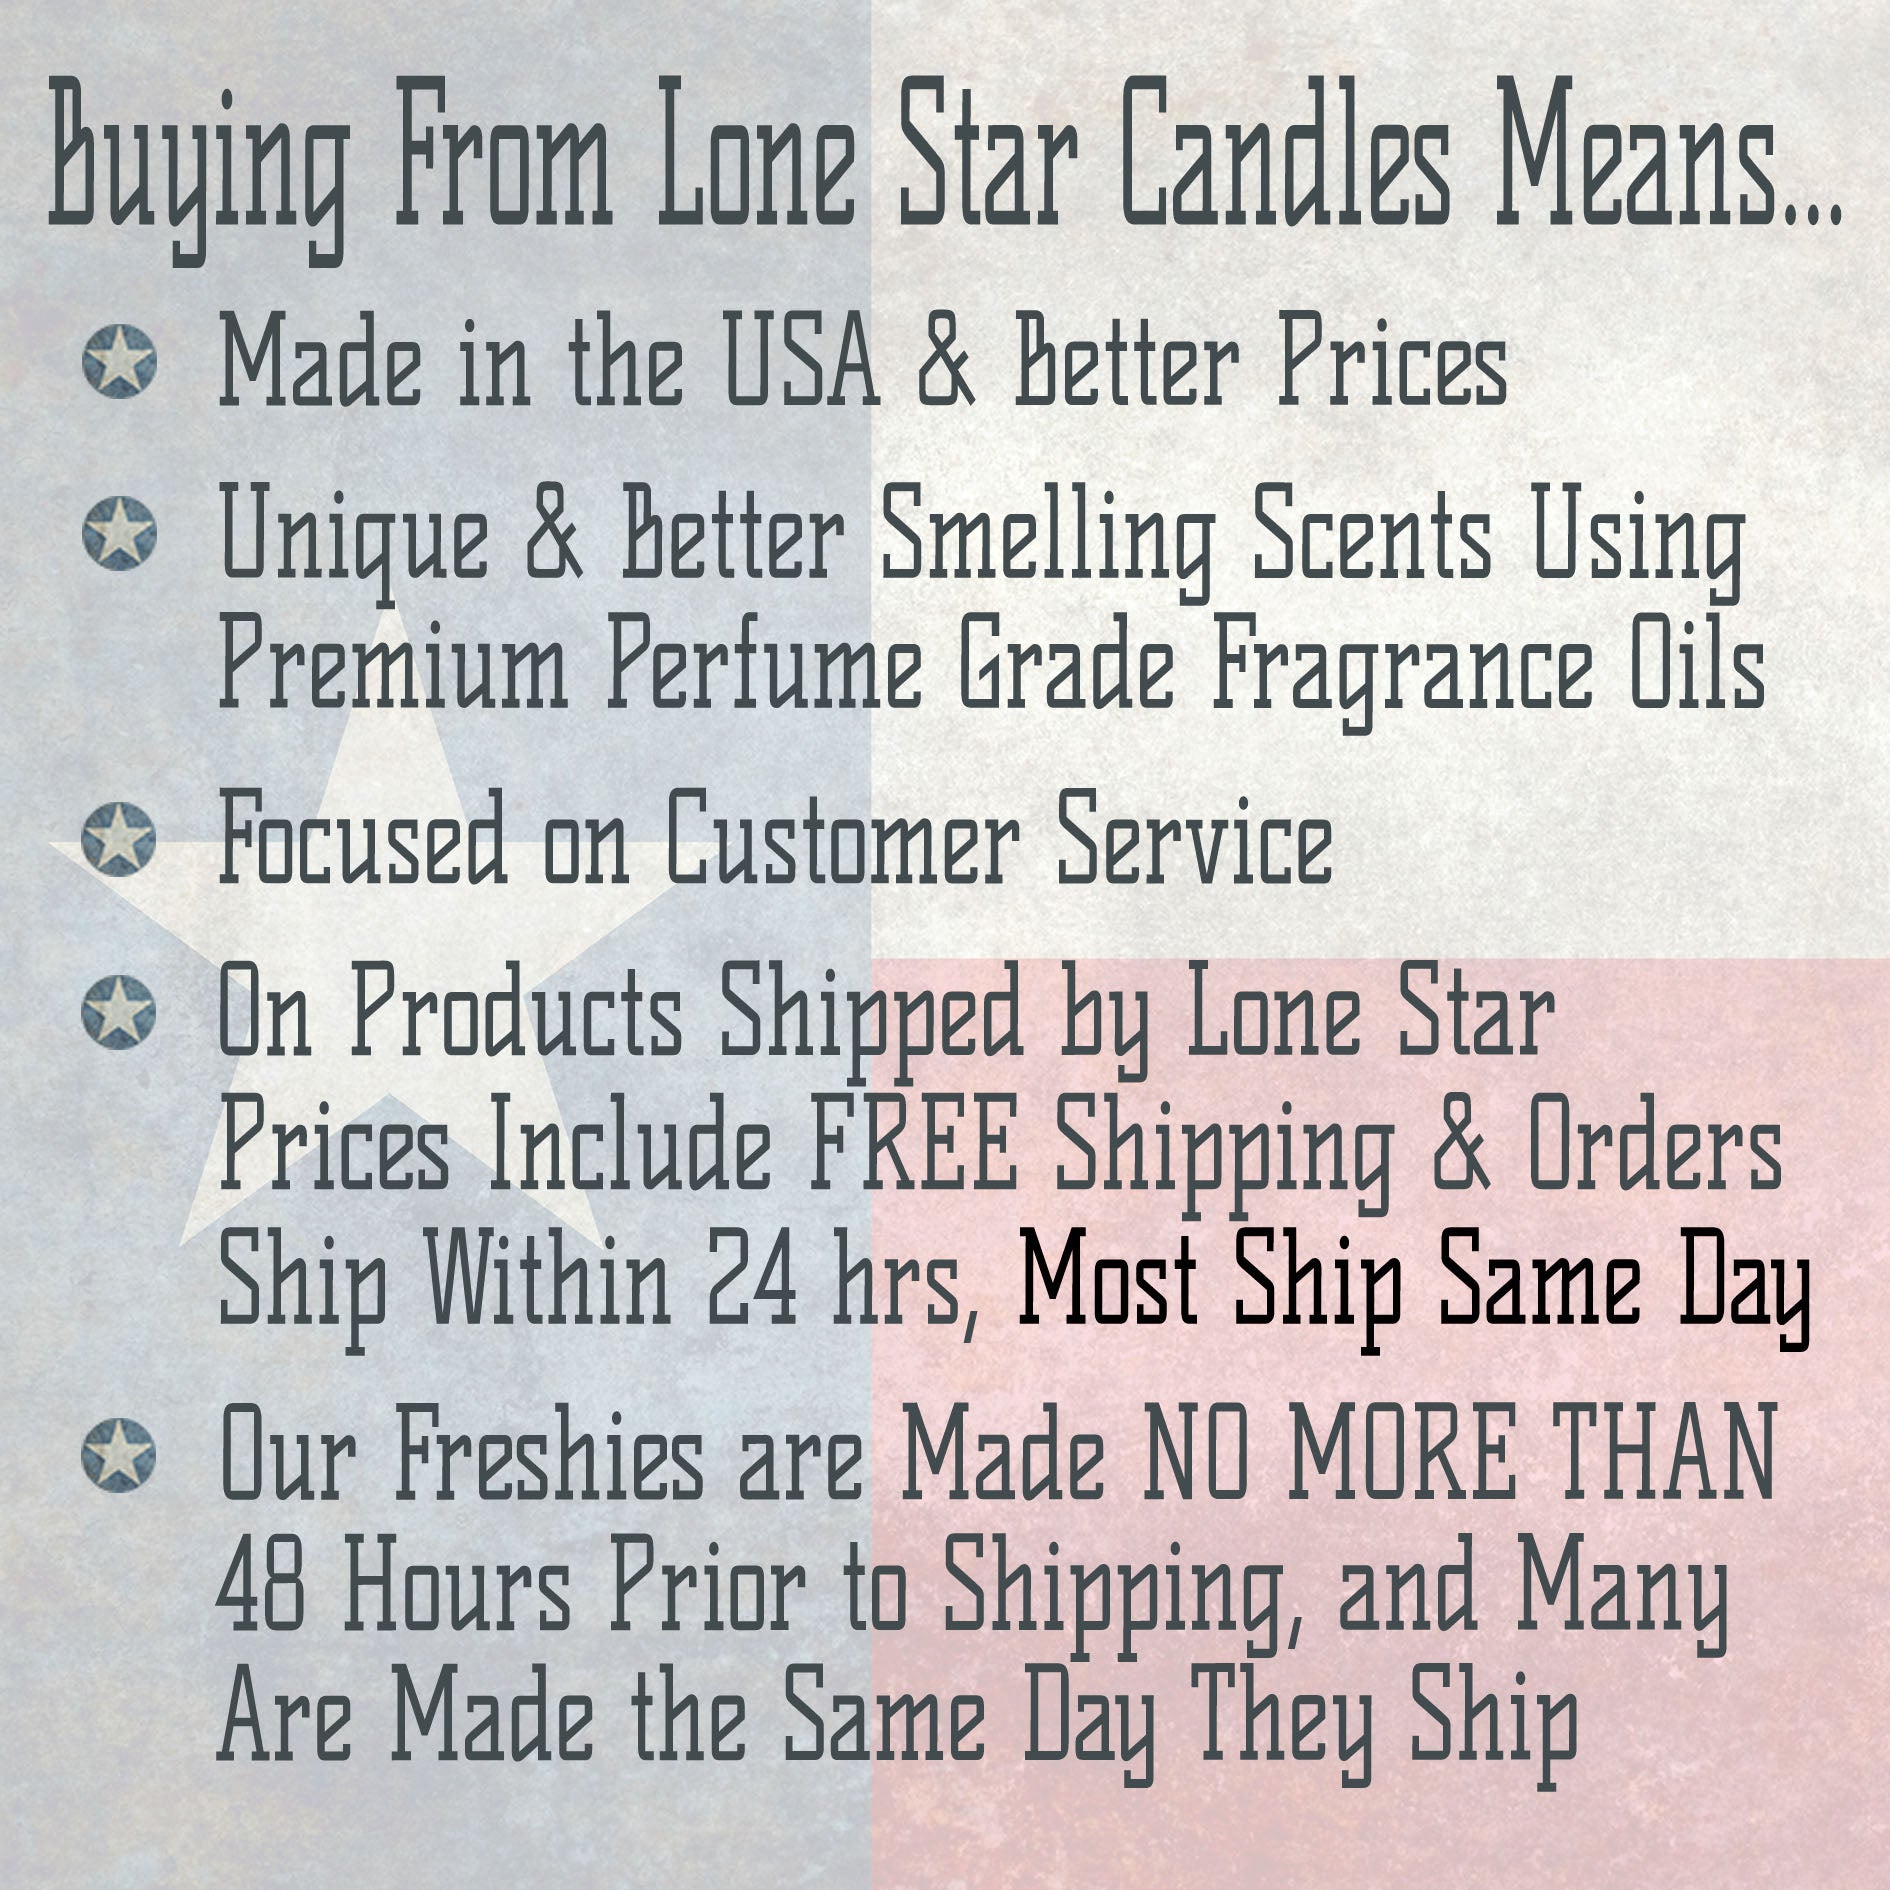 Leather & Lace, Lone Star Candles & More’s Premium Strongly Scented Freshies, Aroma of Genuine Leather and Creamy Vanilla, Car & Air Freshener, USA Made in Texas, High Heel 1-Pack